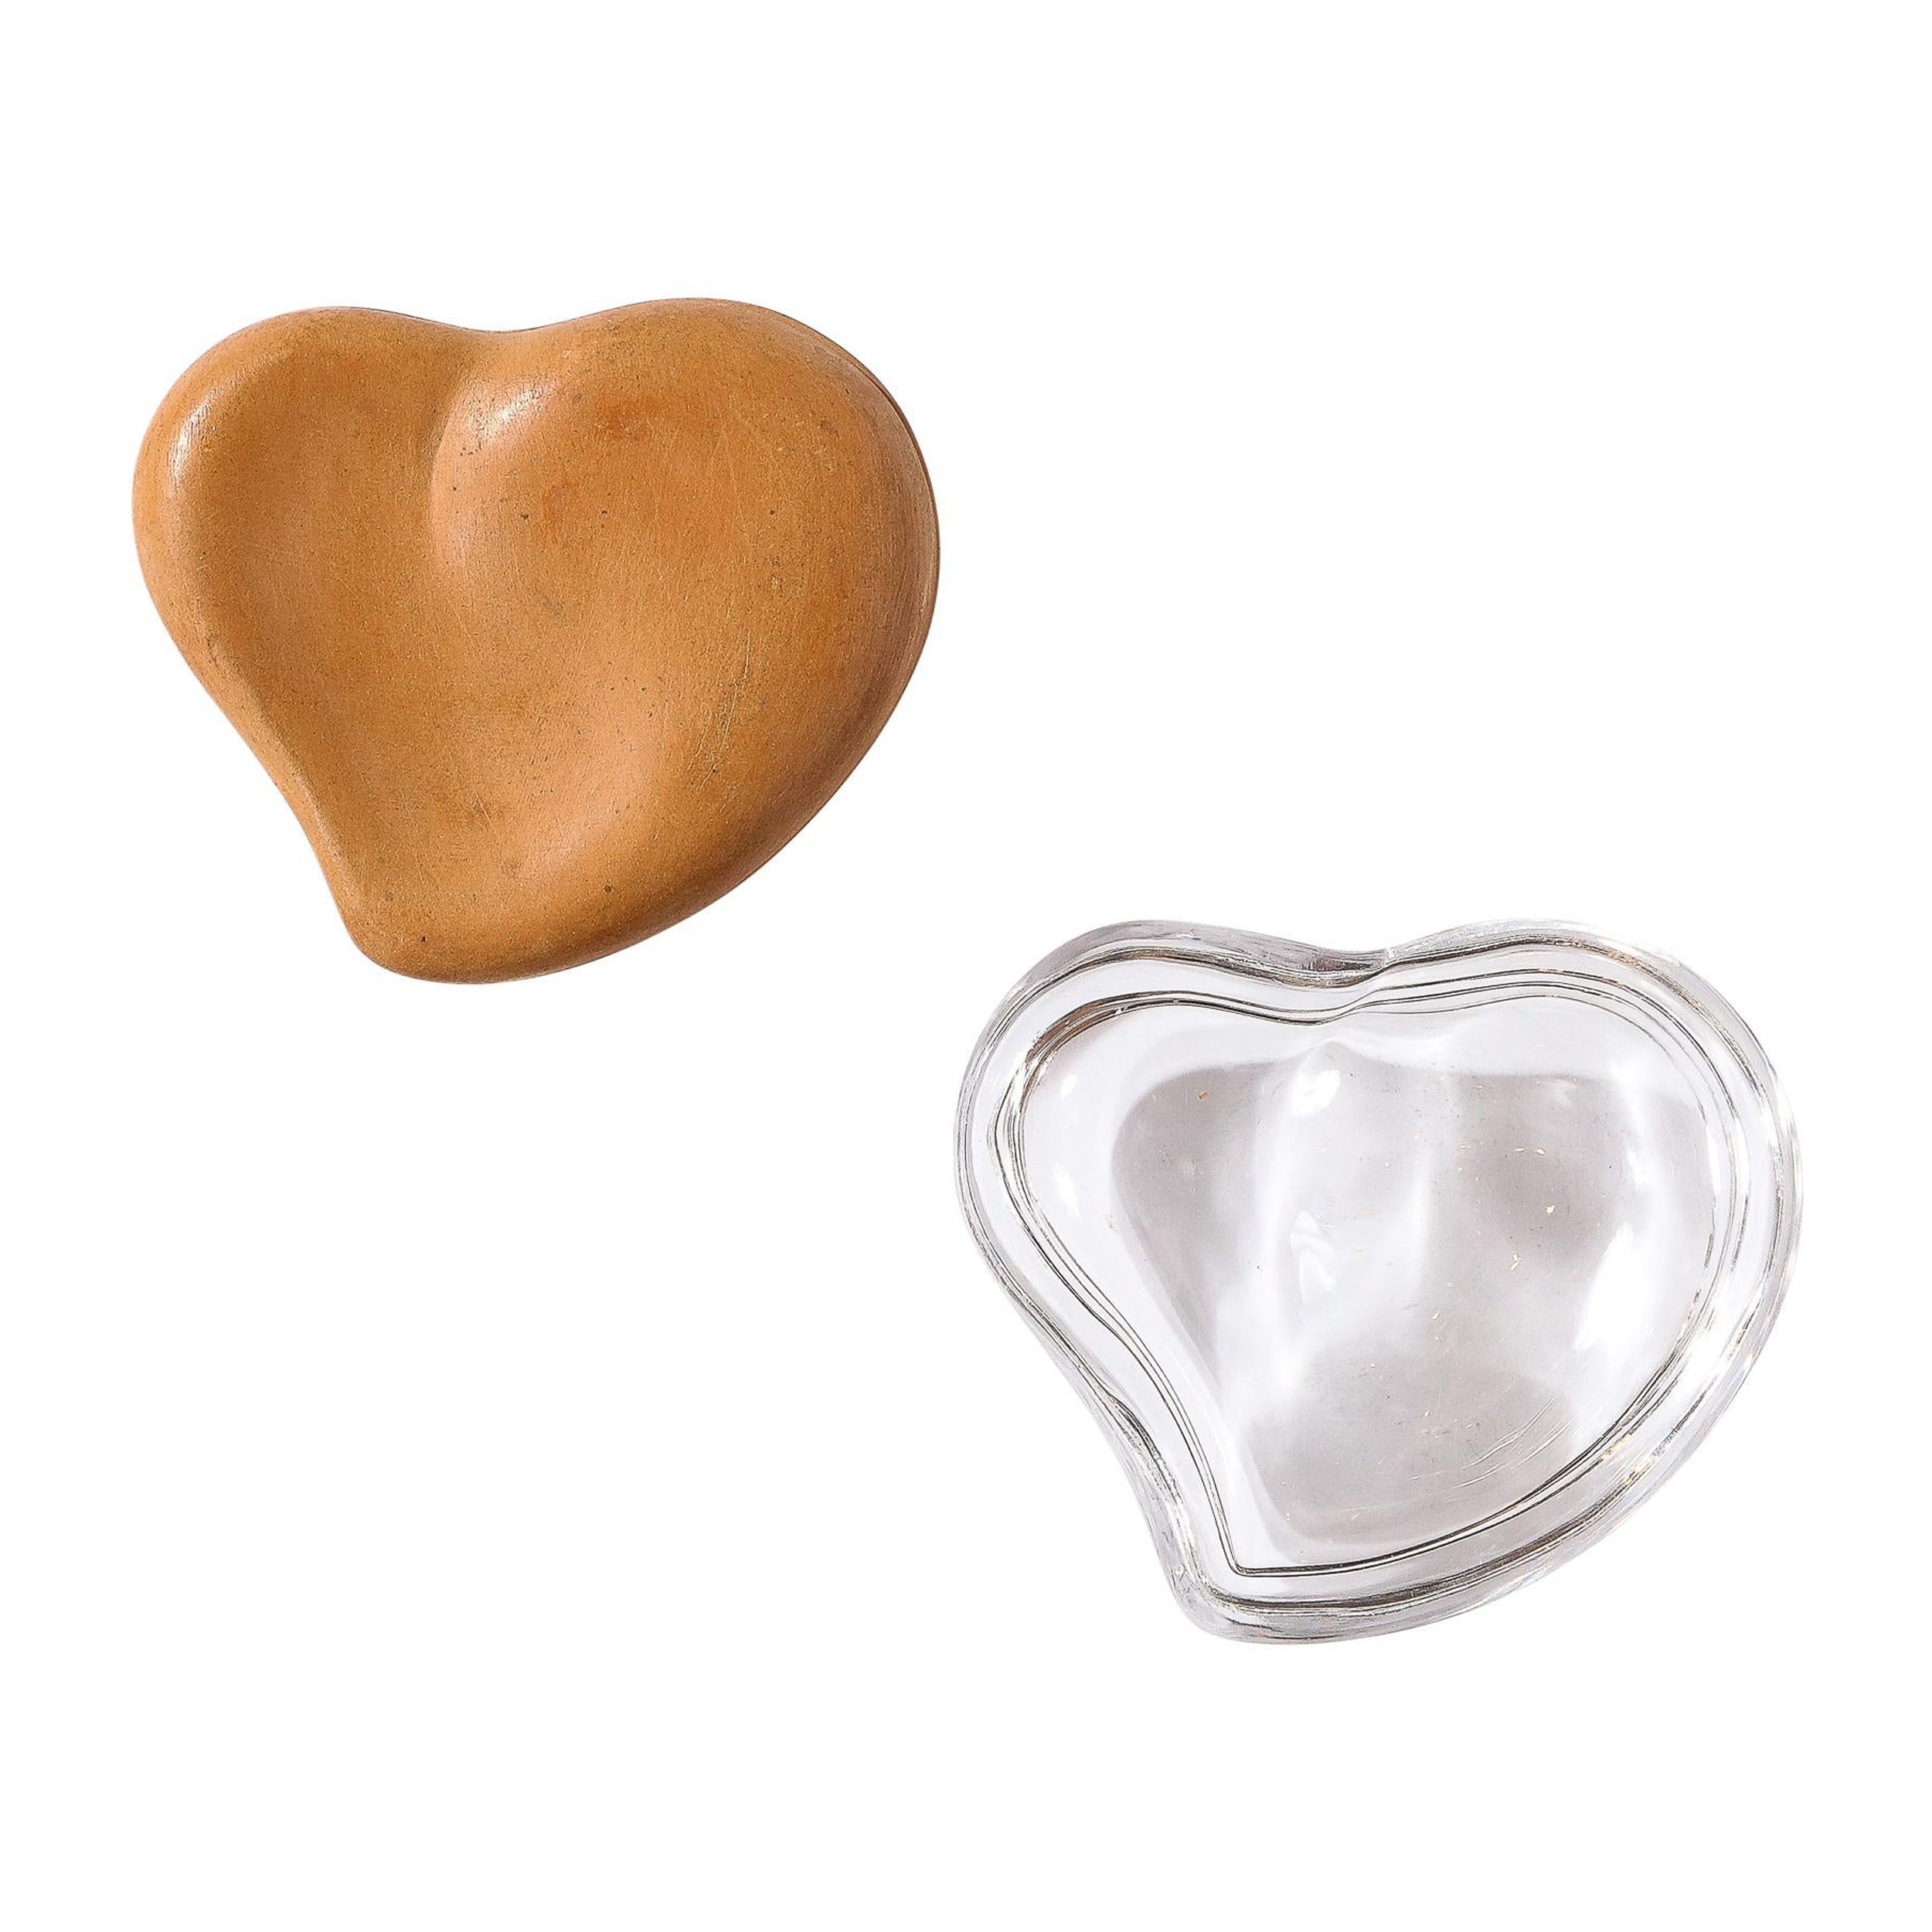 Heart Form Glass & Terra Cotta Trinket Boxes by Elsa Peretti for Tiffany & Co. For Sale